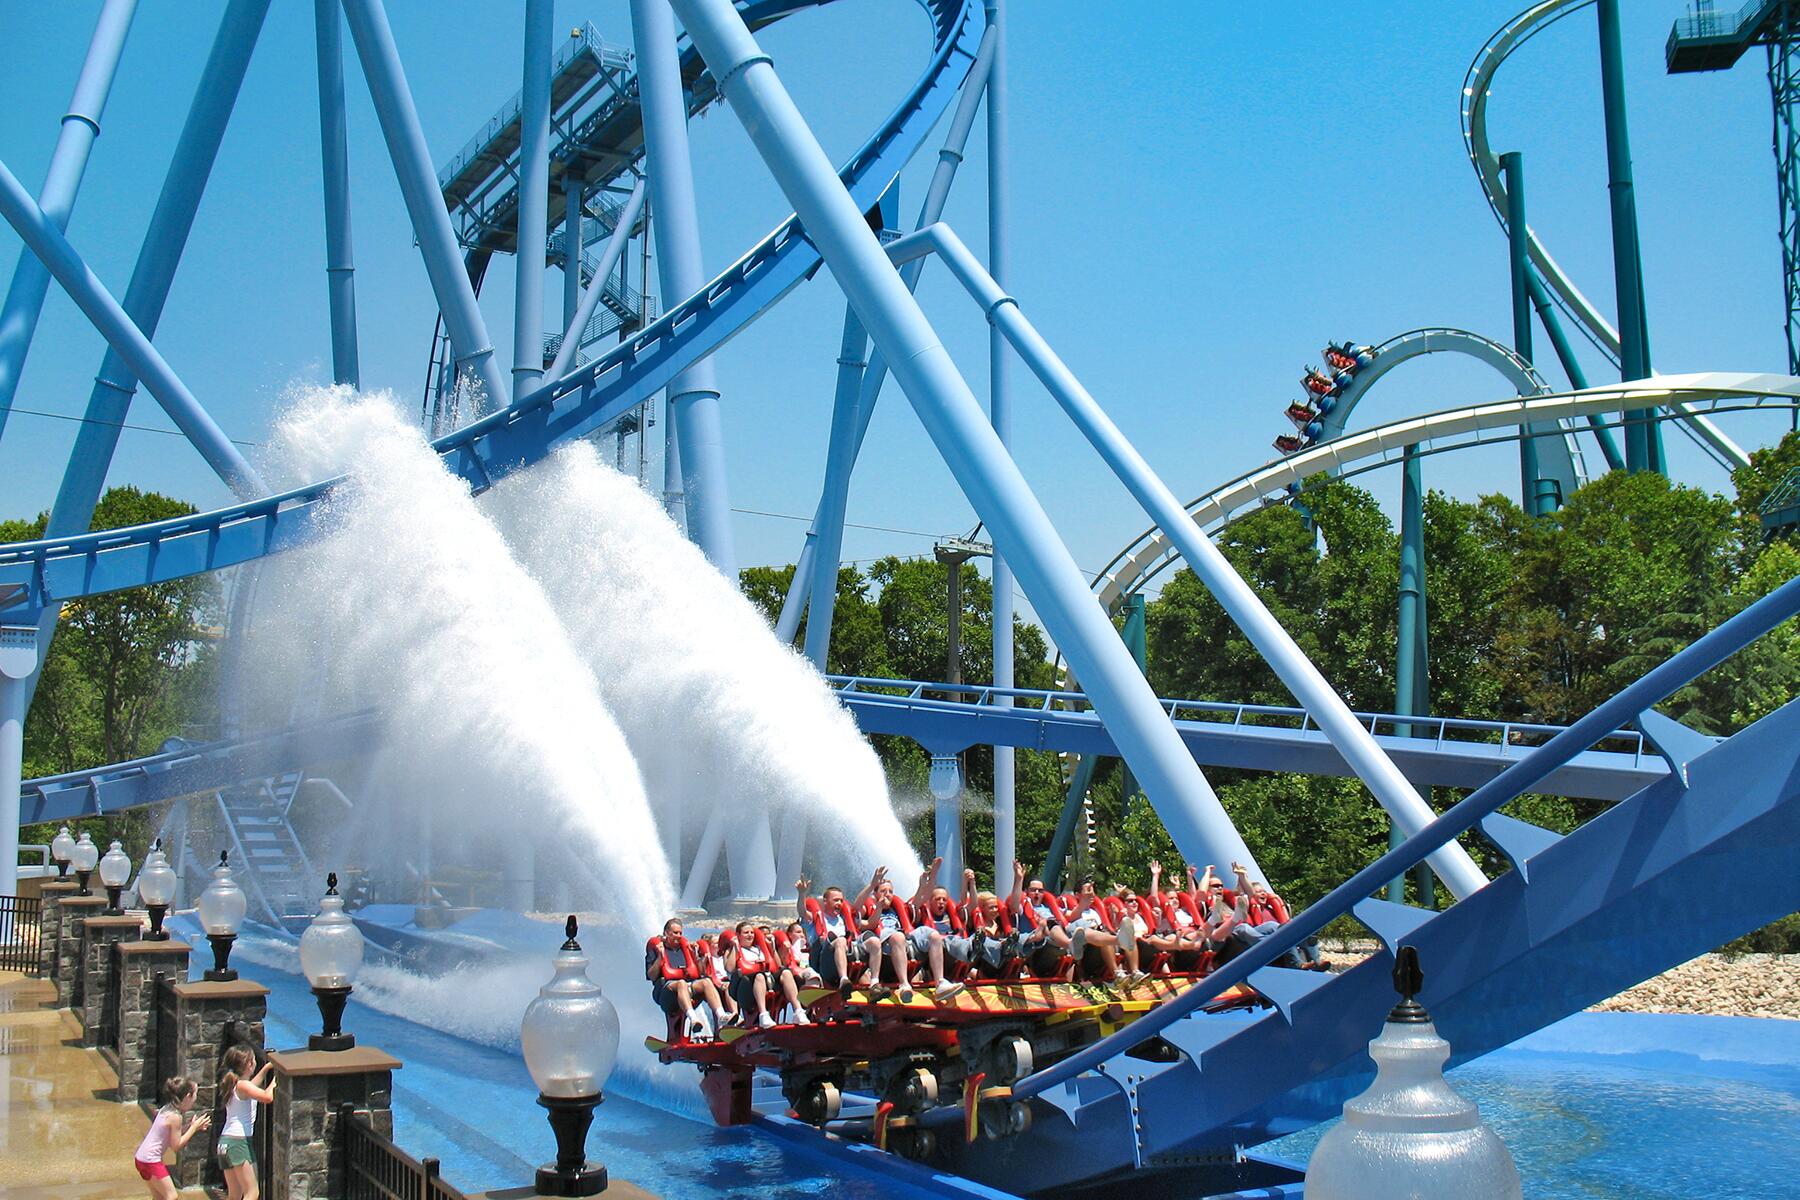 The Scariest Roller Coasters for Thrill Seekers in the United States